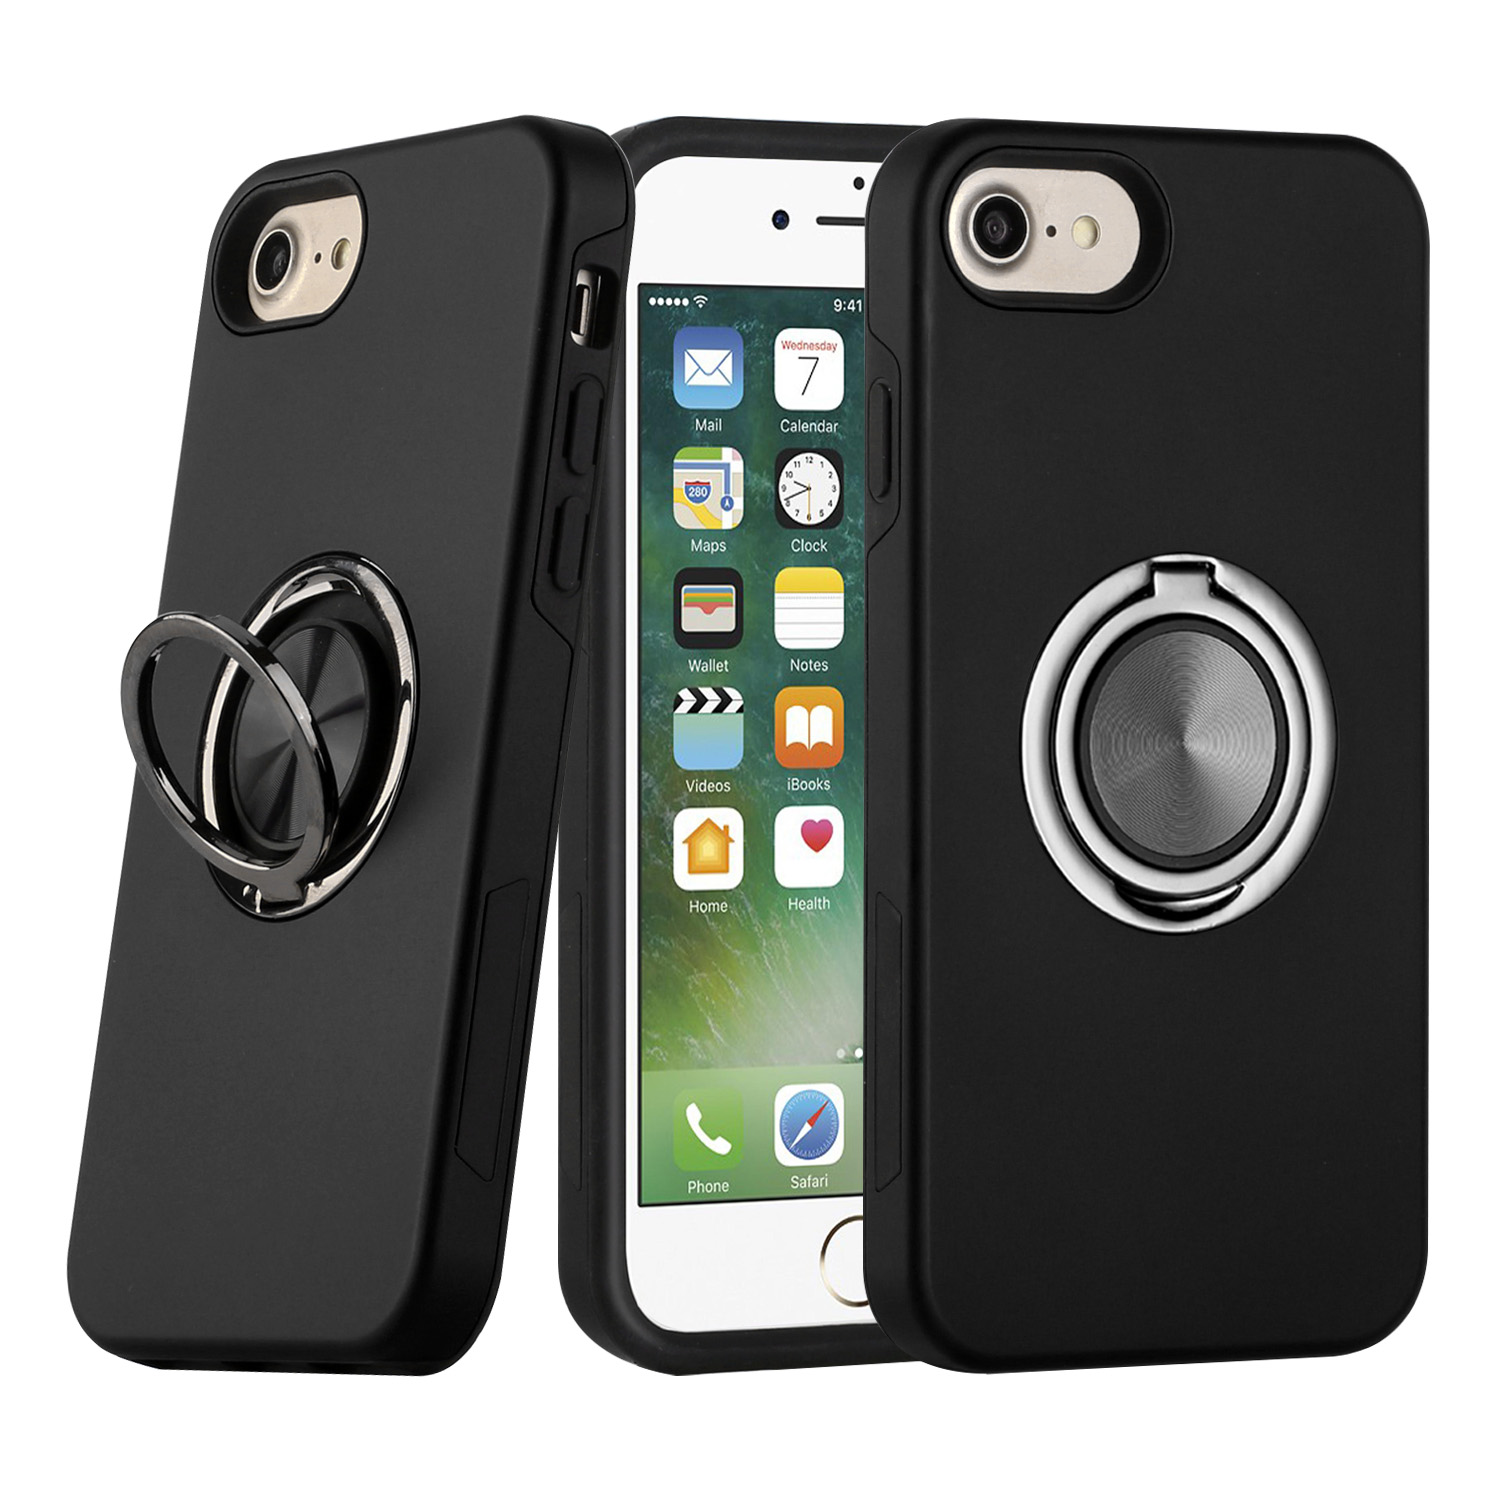 Glossy Dual Layer Armor Hybrid Flat RING Case for iPhone 8 Plus / 7 Plus (Black)